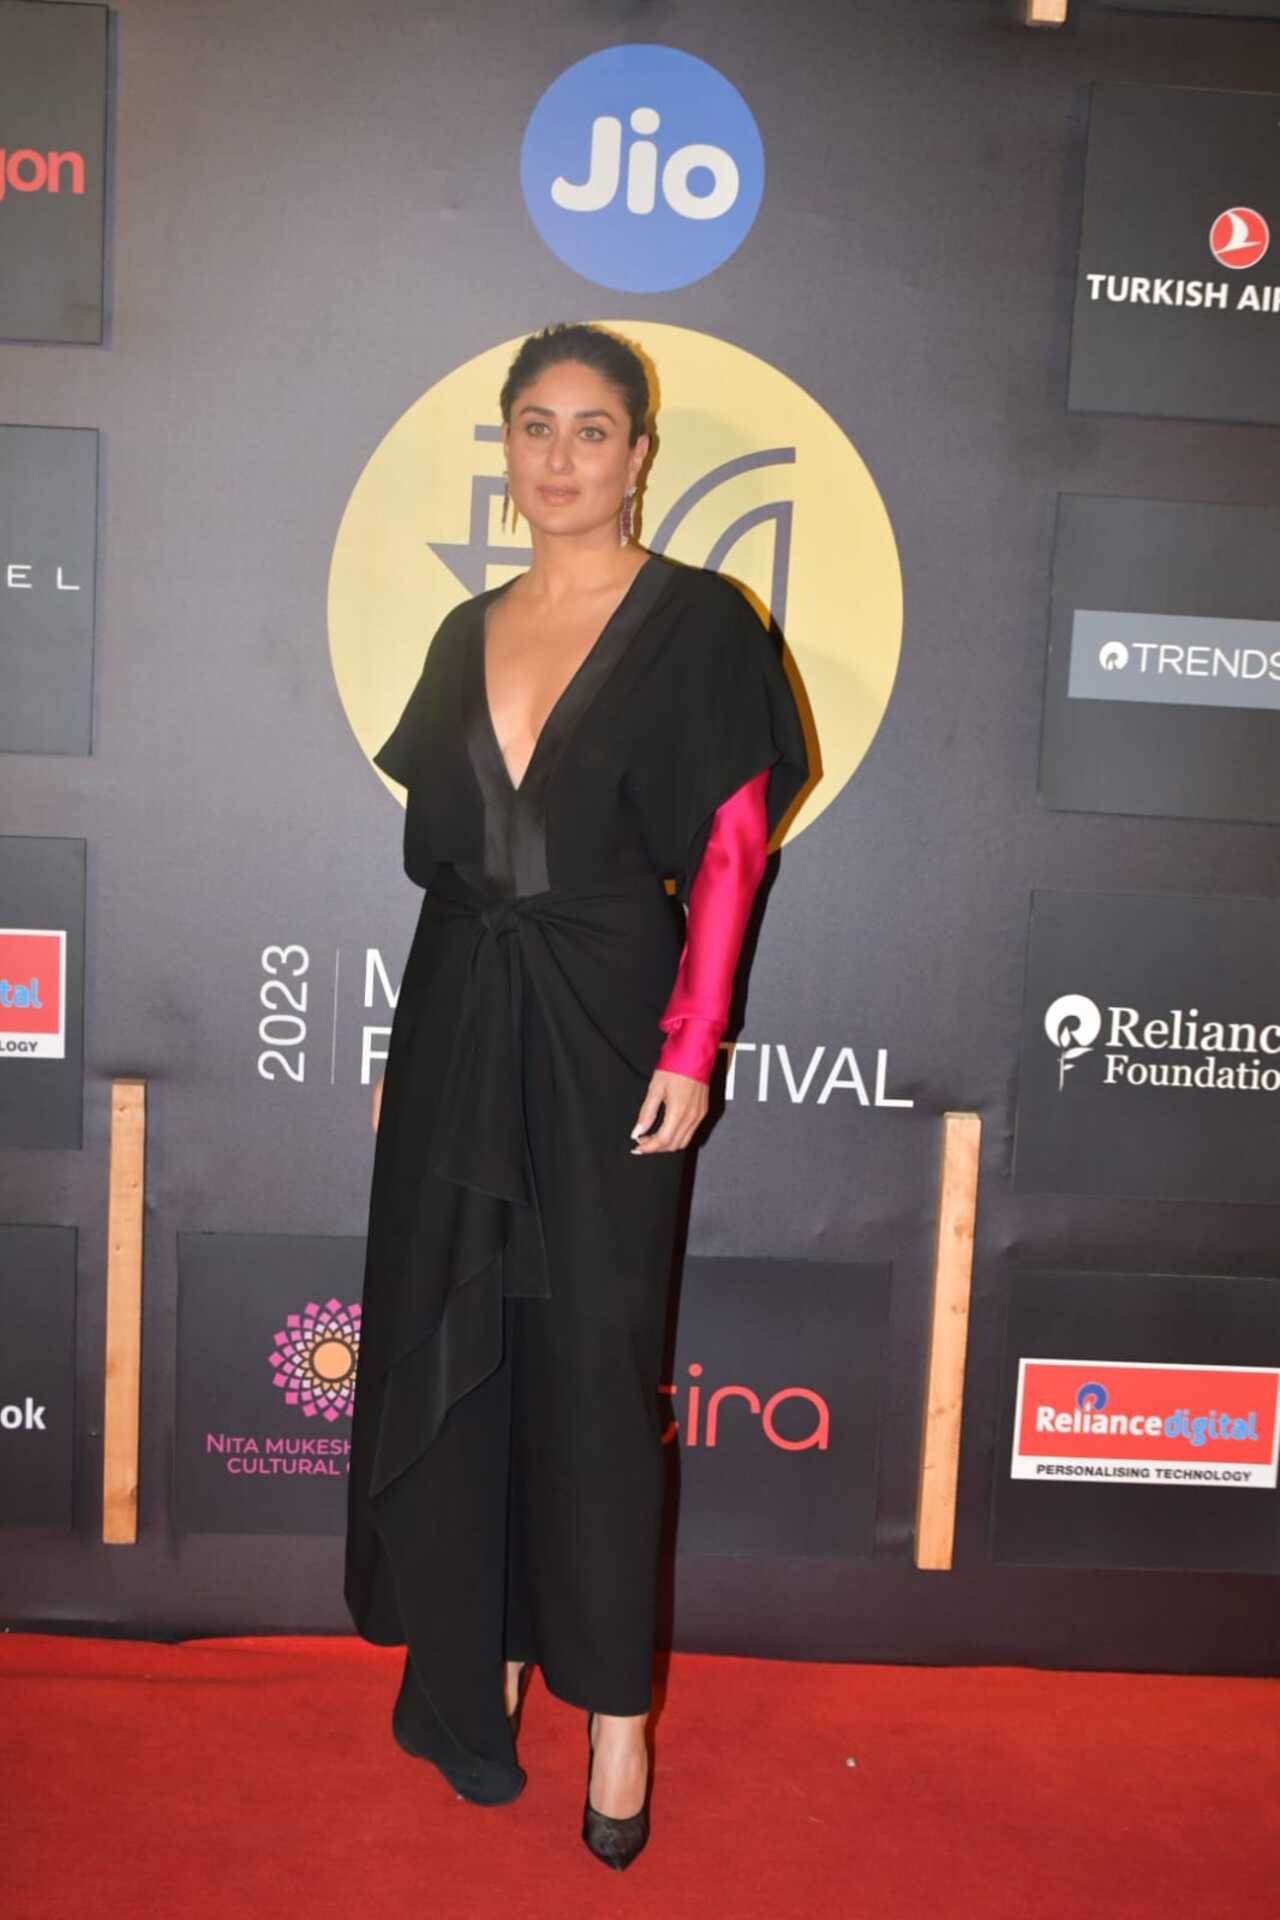 Kareena Kapoor opted for an all-black outfit with a tinge of pink for the big opening night